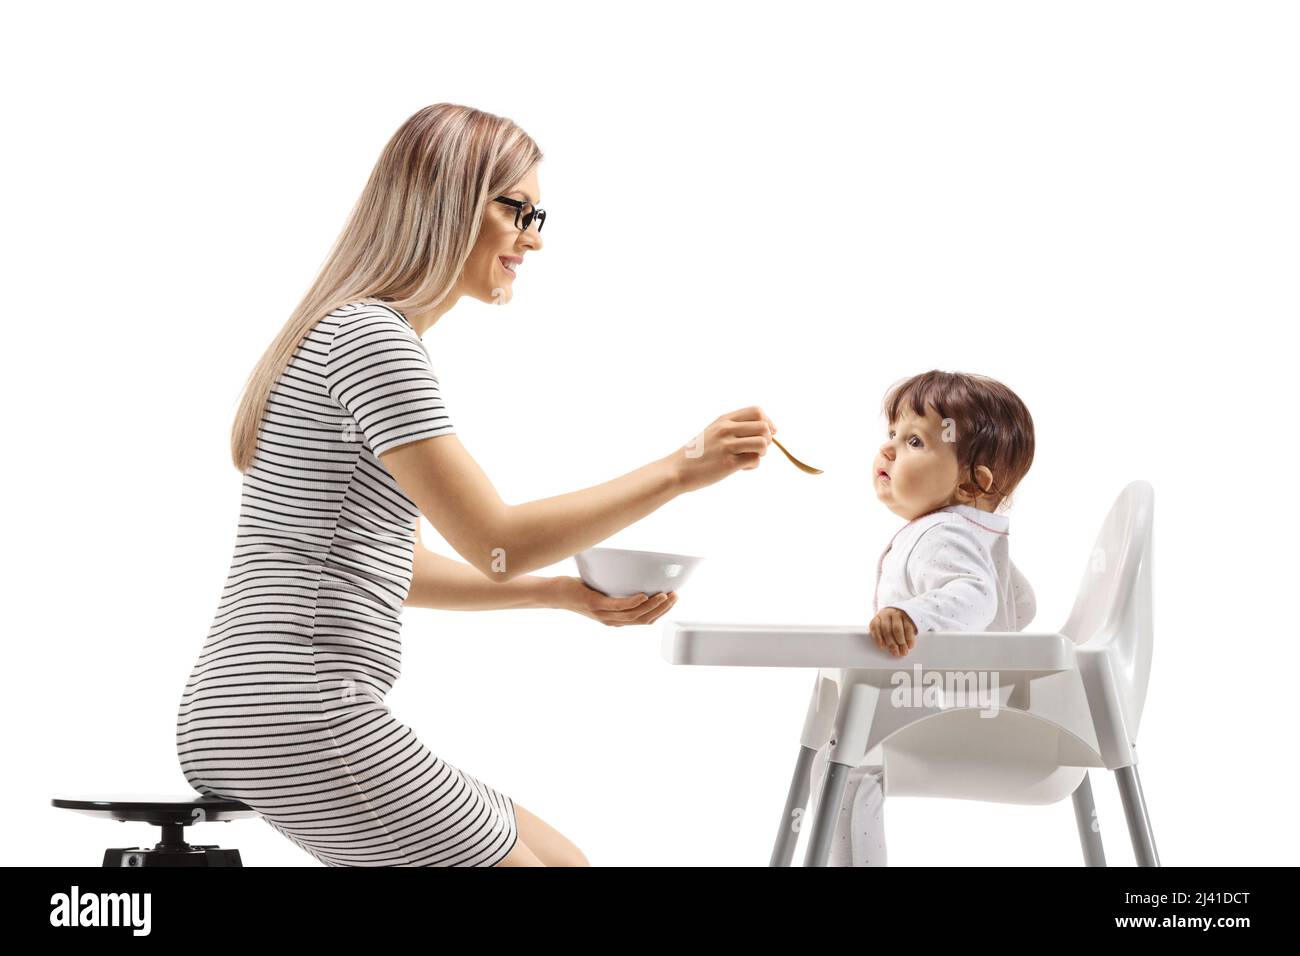 Mother feeding a baby seated in a chair isolated on white background Stock Photo